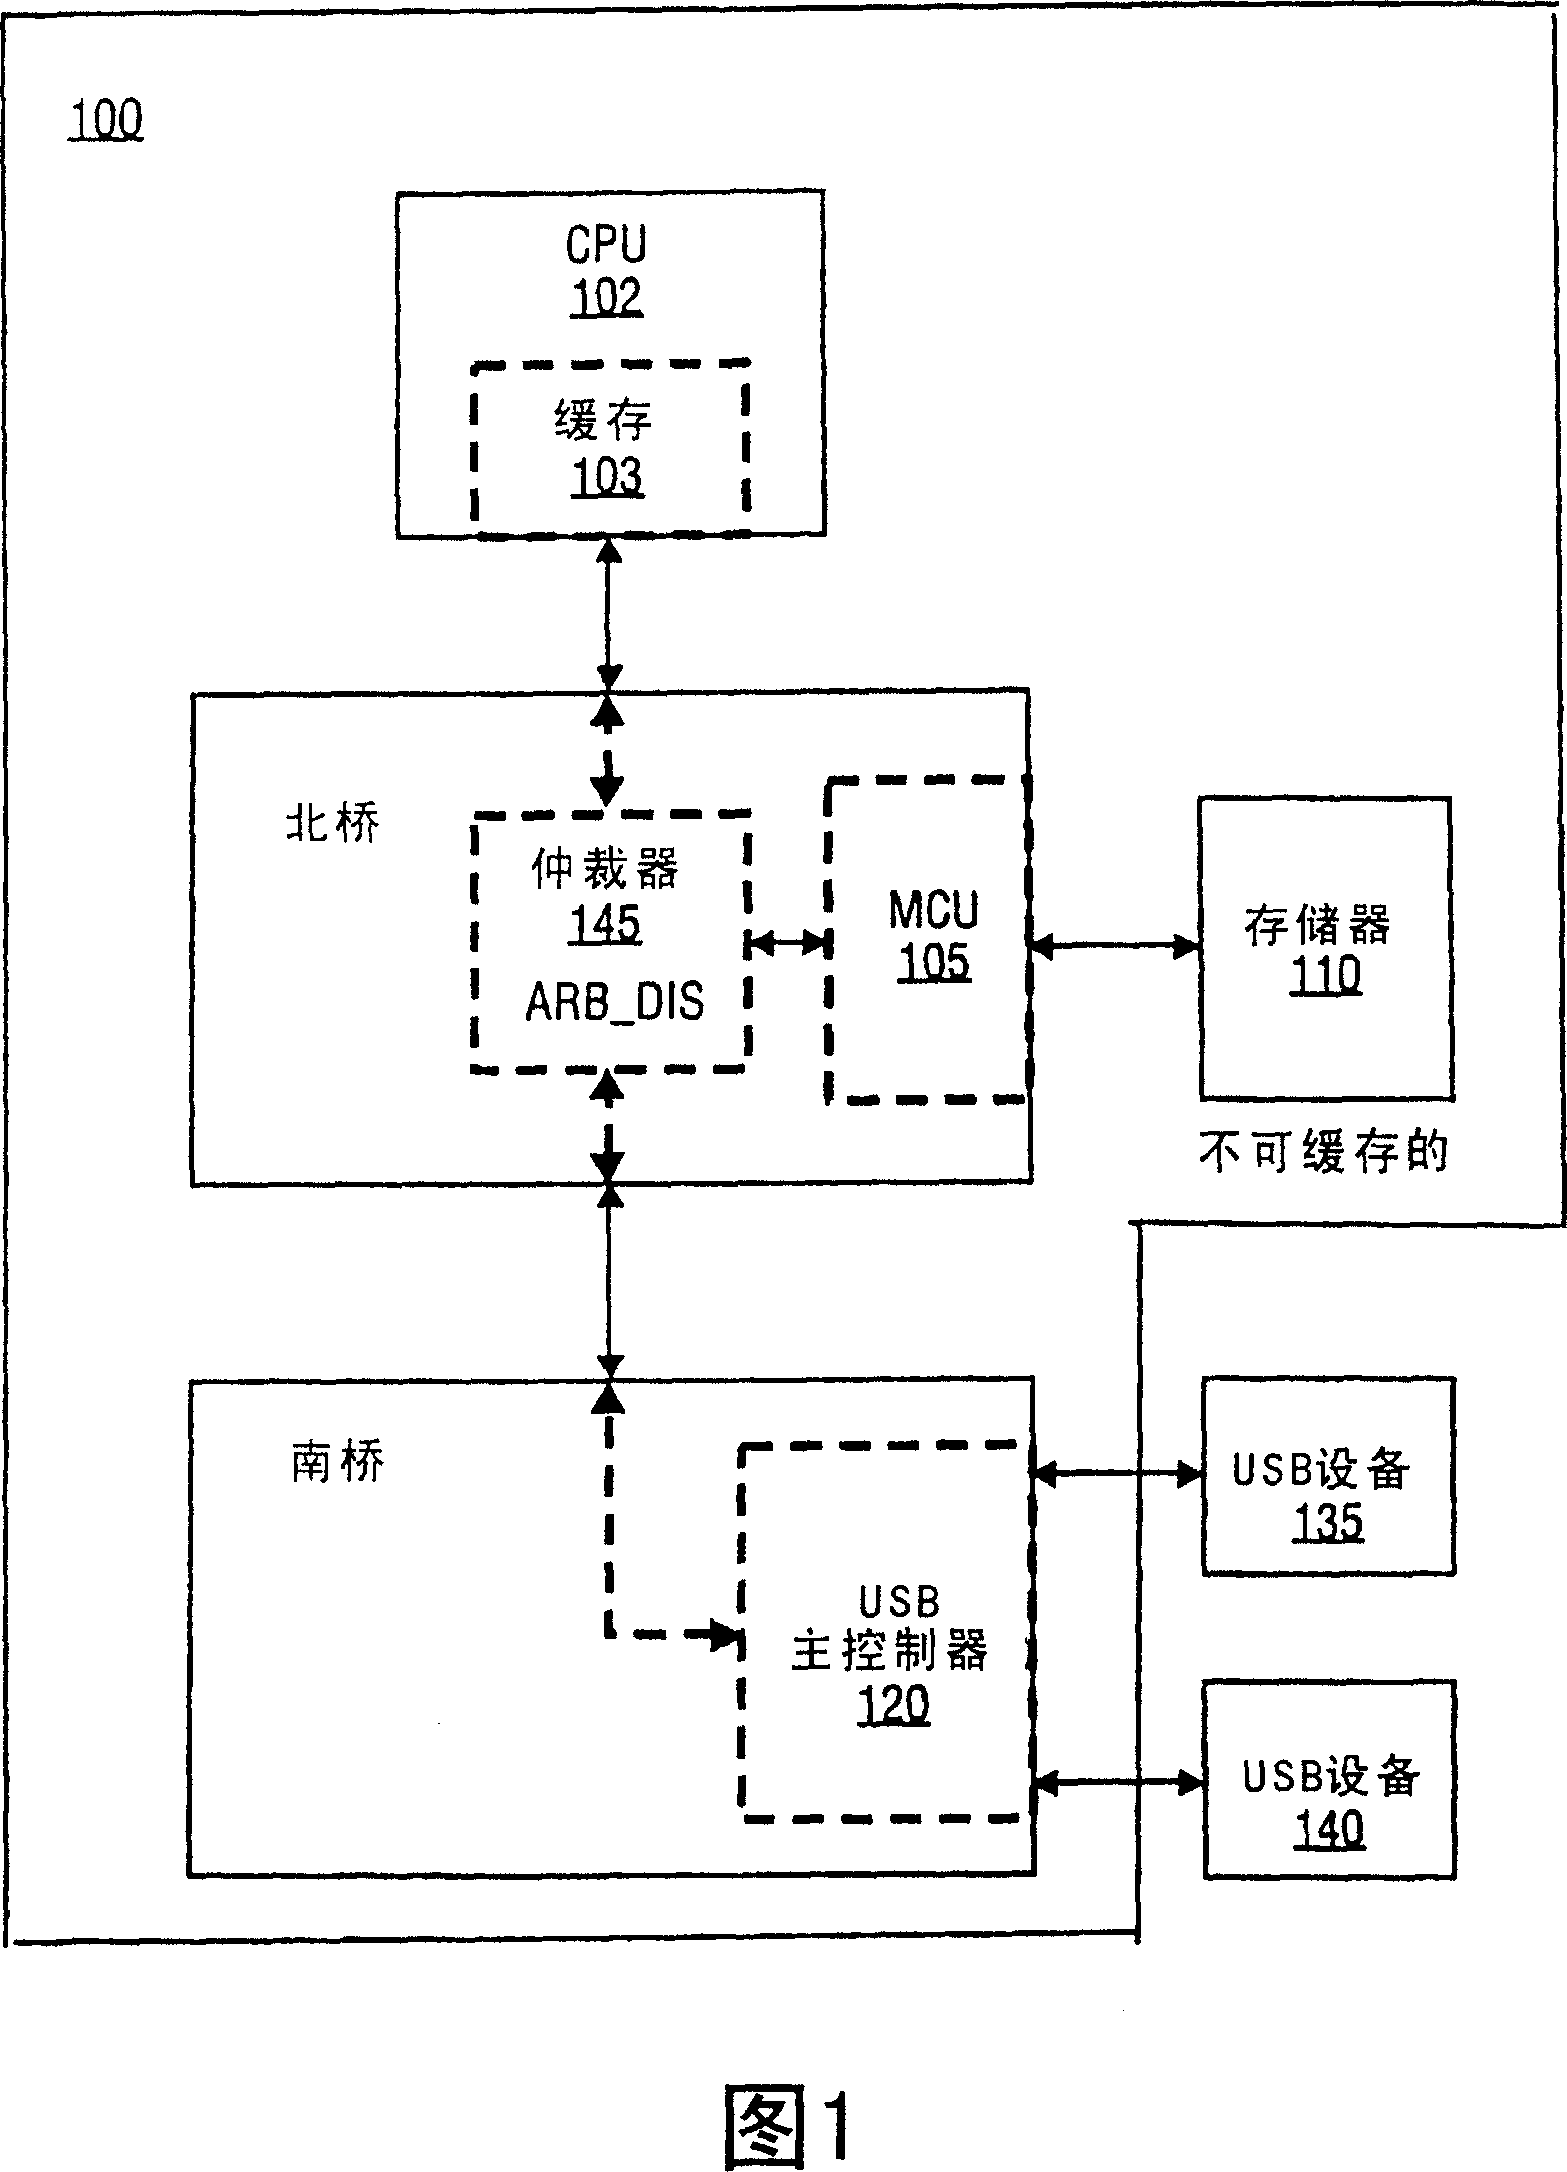 Method to reduce power in a computer system with bus master devices